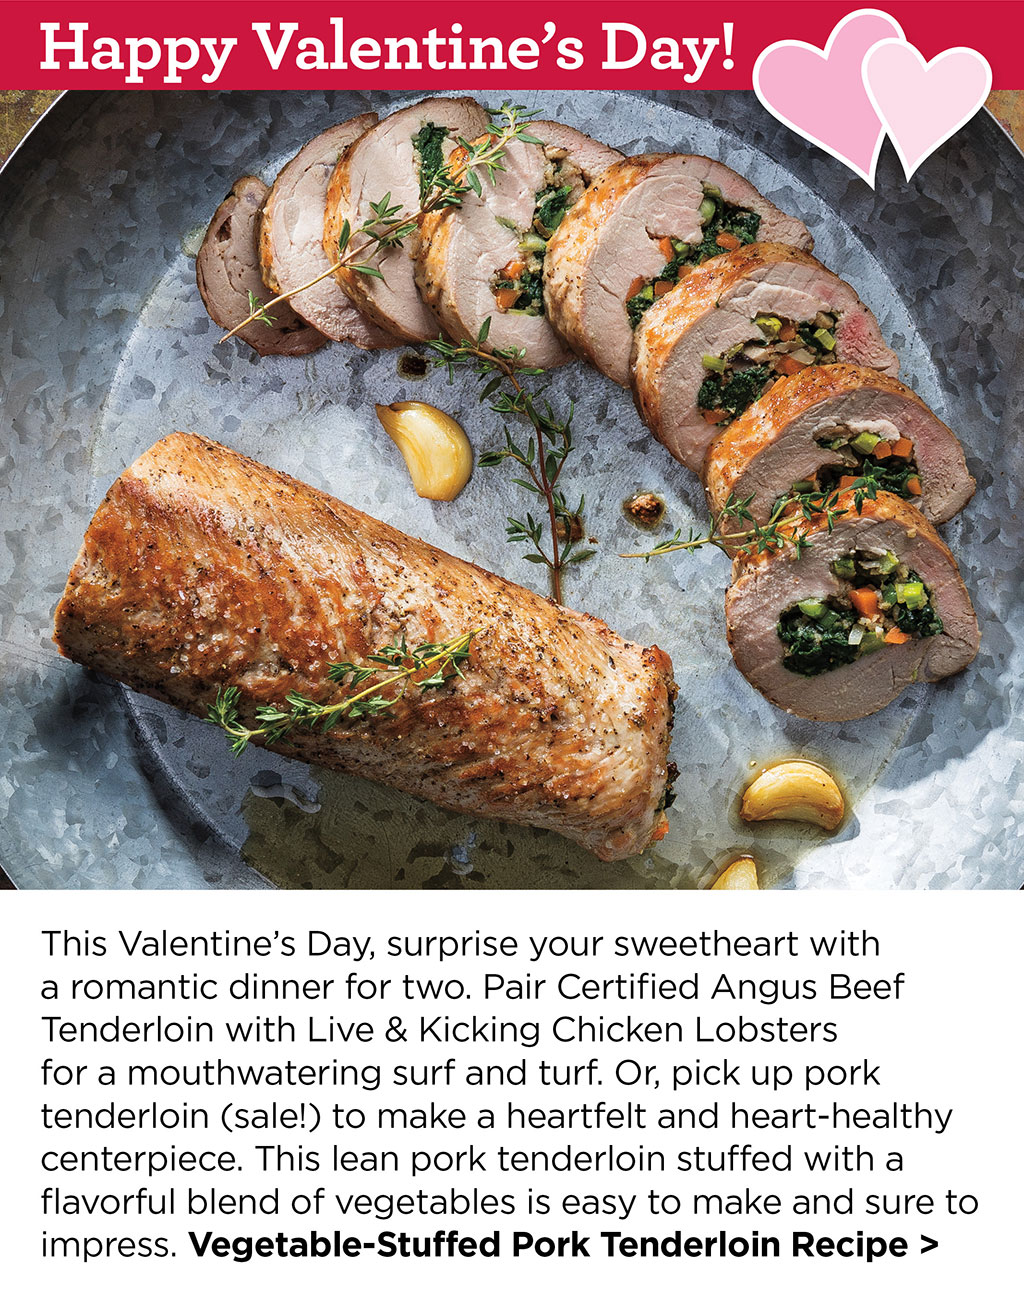 Happy Valentines Day - This Valentines Day, surprise your sweetheart with a romantic dinner for two. Pair Certified Angus Beef Tenderloin with Live & Kicking Chicken Lobsters for a mouthwatering surf and turf. Or, pick up pork tenderloin (sale!) to make a heartfelt and heart-healthy centerpiece. This lean pork tenderloin stuffed with a flavorful blend of vegetables is easy to make and sure to impress. Vegetable-Stuffed Pork Tenderloin Recipe >